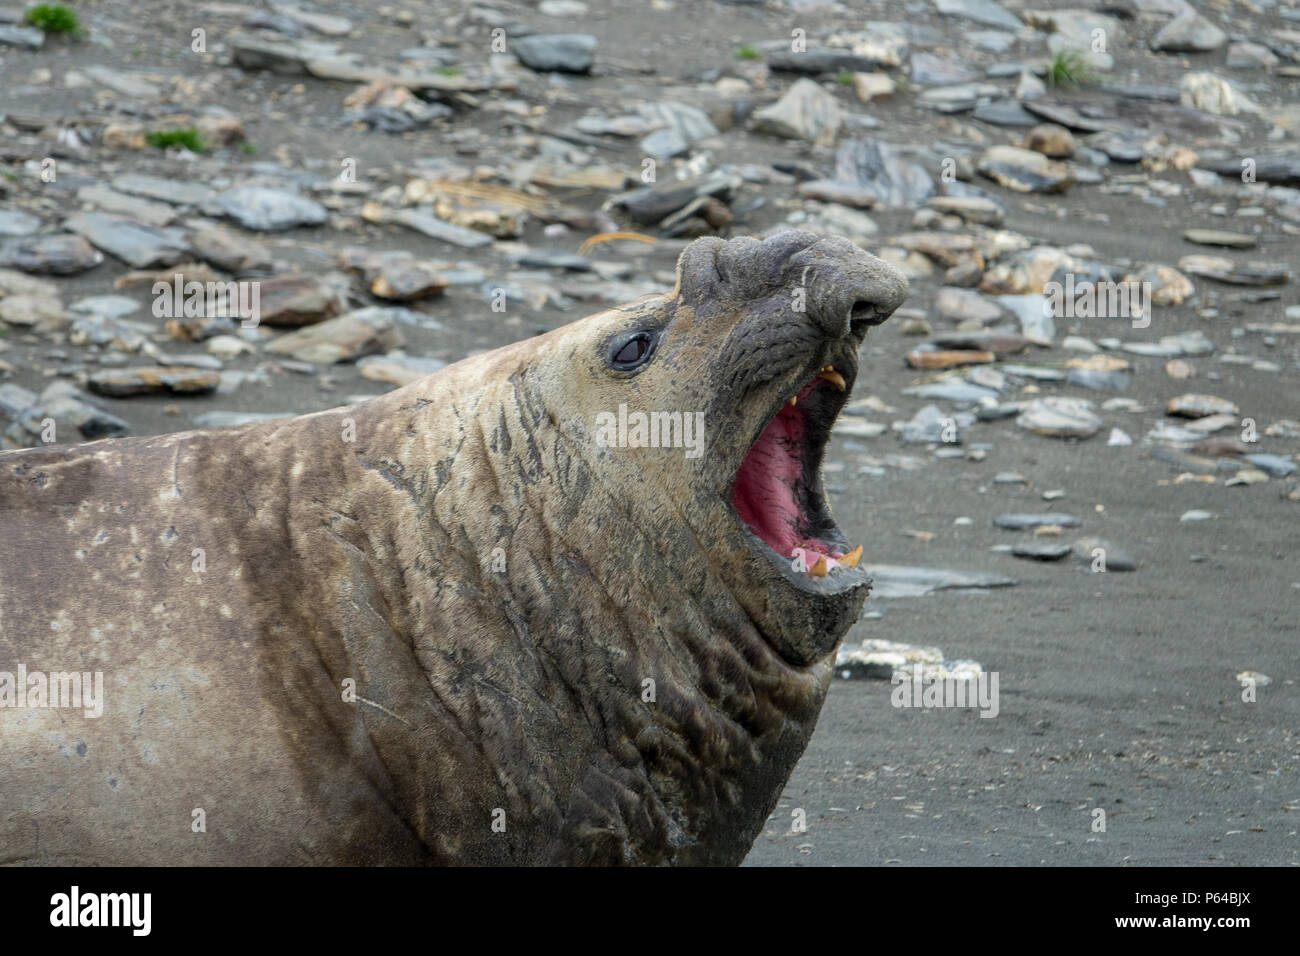 Male southern elephant seal yawning at St Andrew's Bay, South Georgia Island Stock Photo